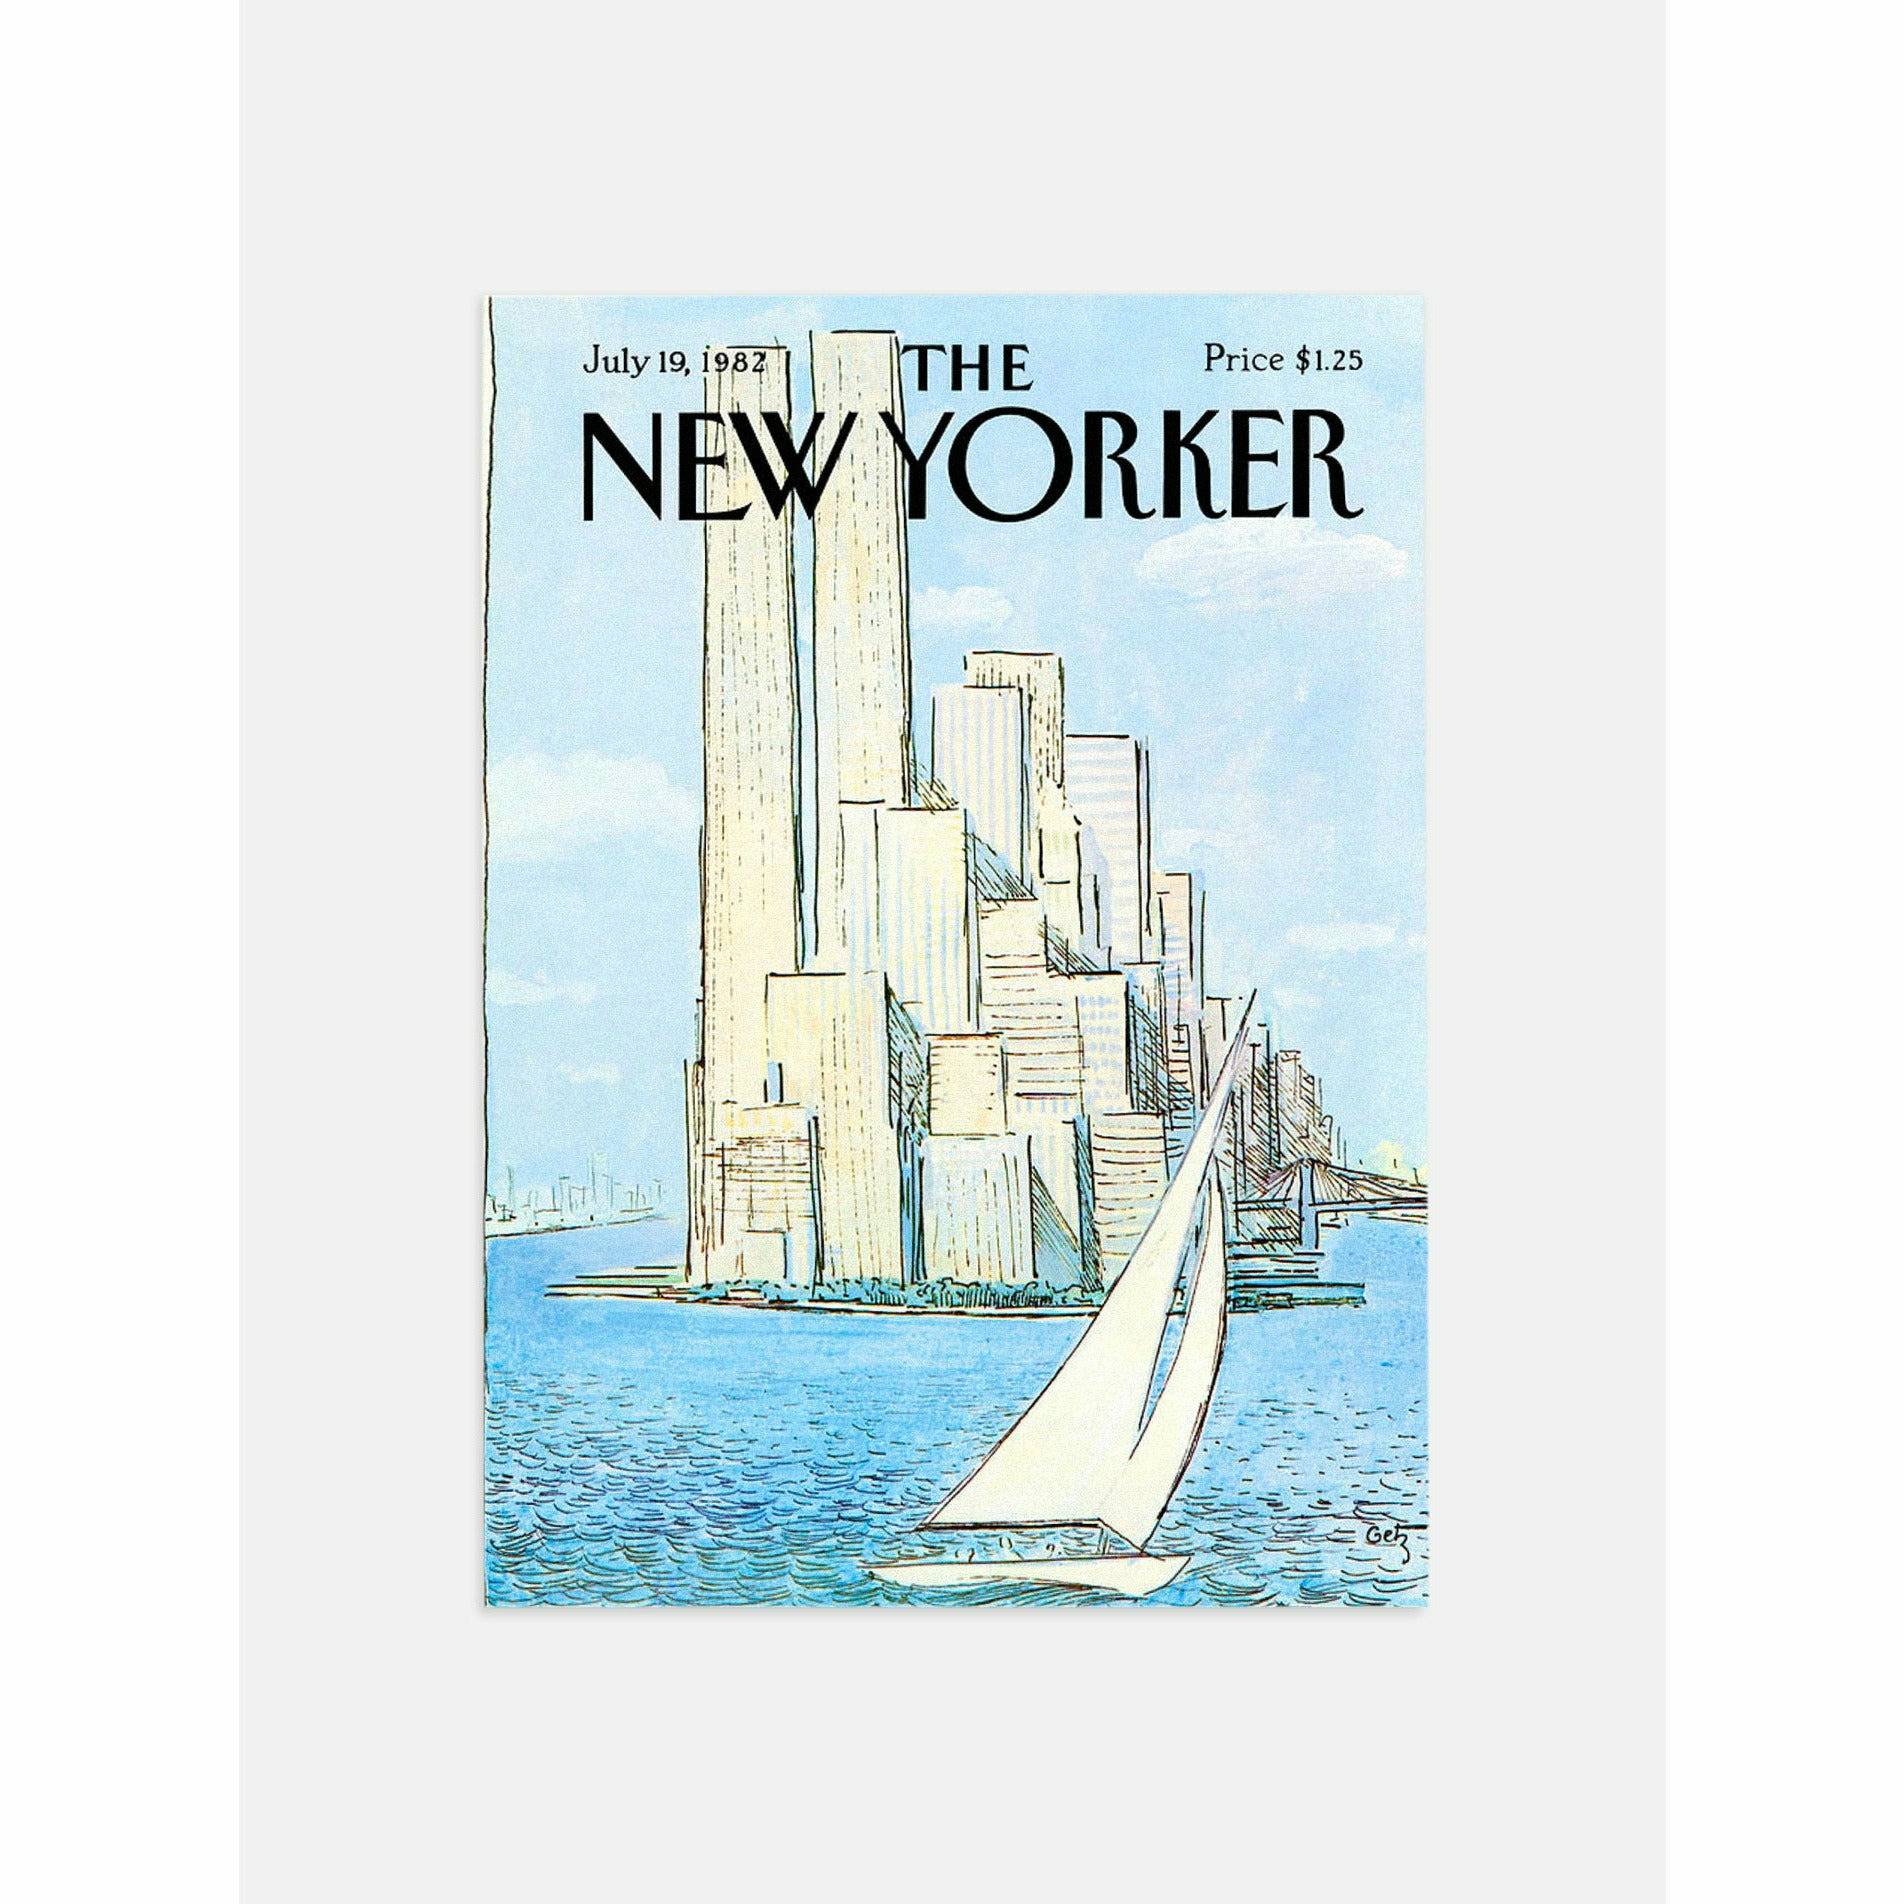 The New Yorker July 19, 1982